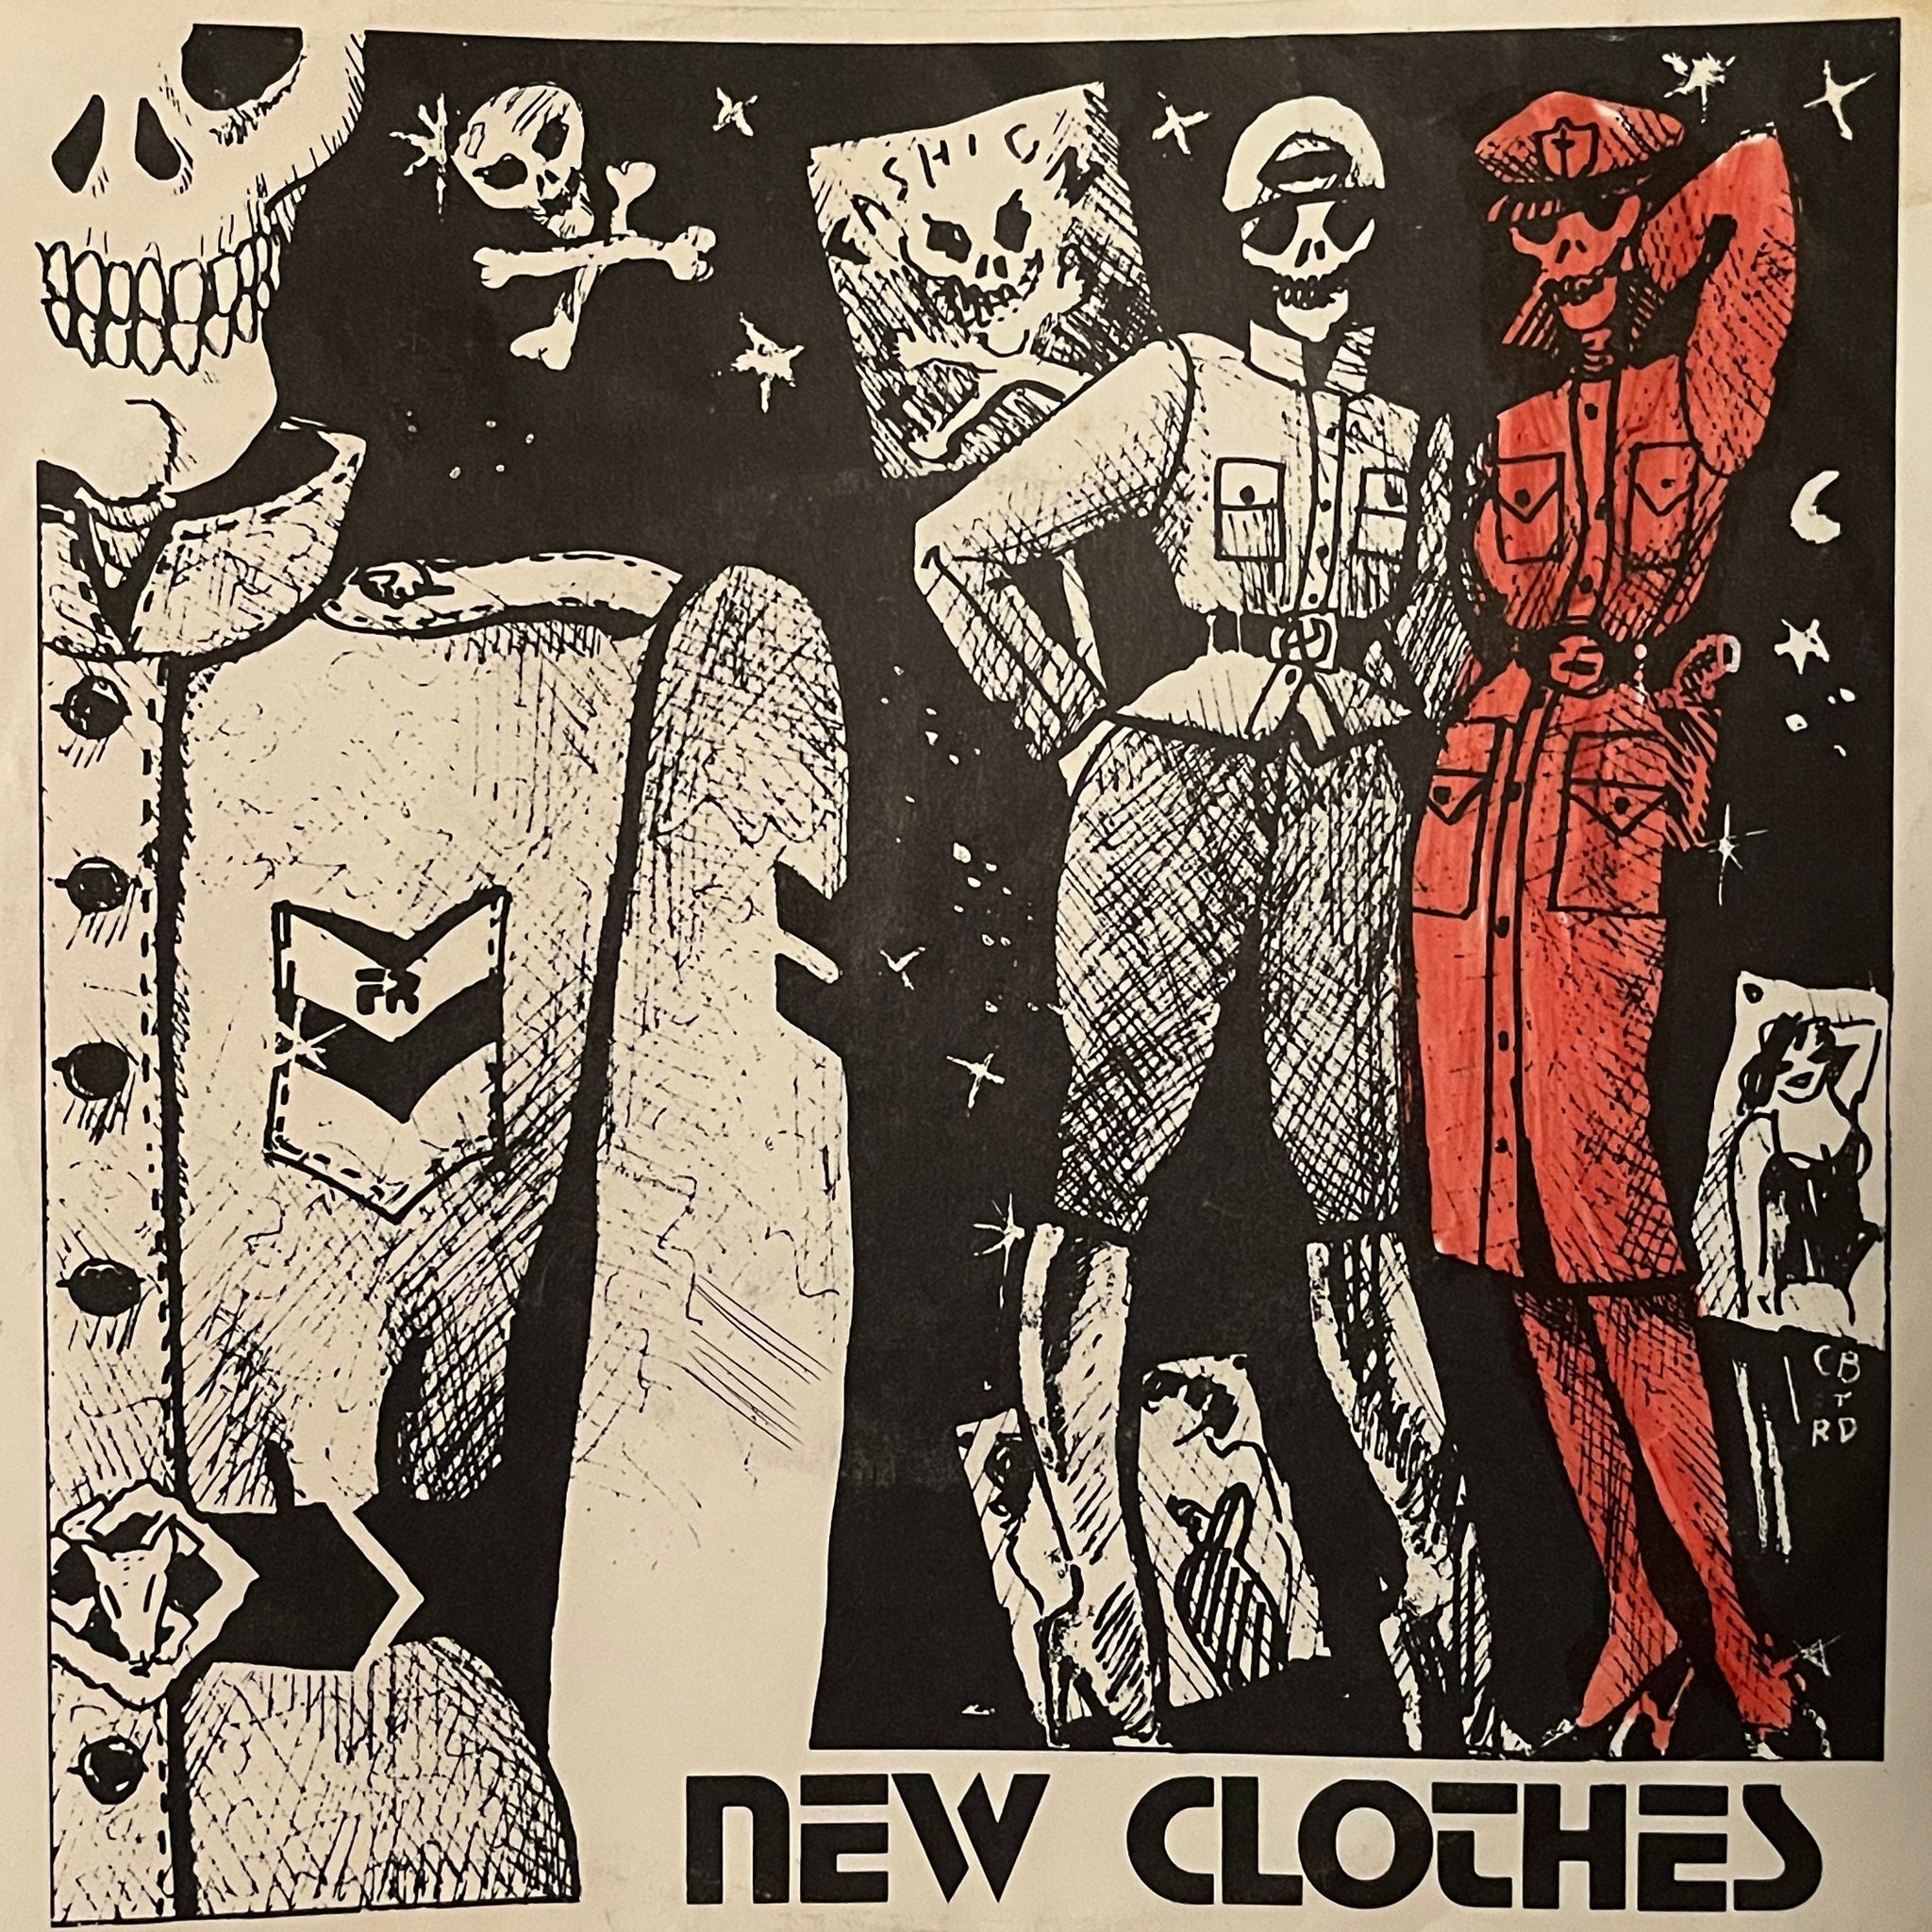 Marty Gras & The Flamingo Lightning Orchestra – New Clothes 7"